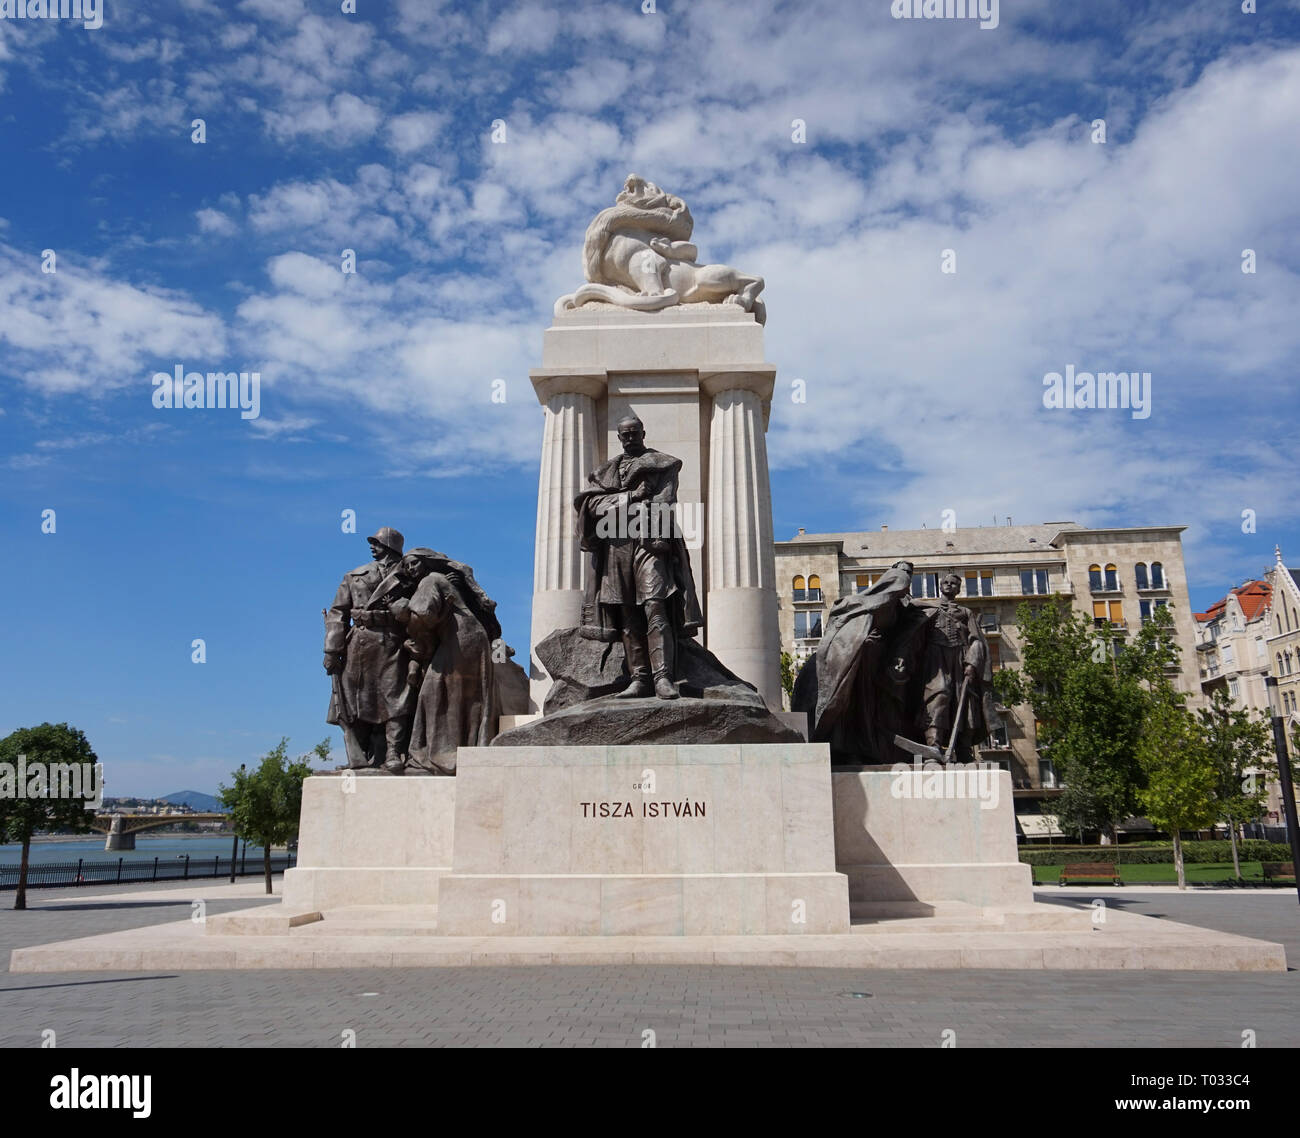 Hungarian Parliament Monument to Tisza Istvan Statue Landscape in Budapest, Hungary Stock Photo